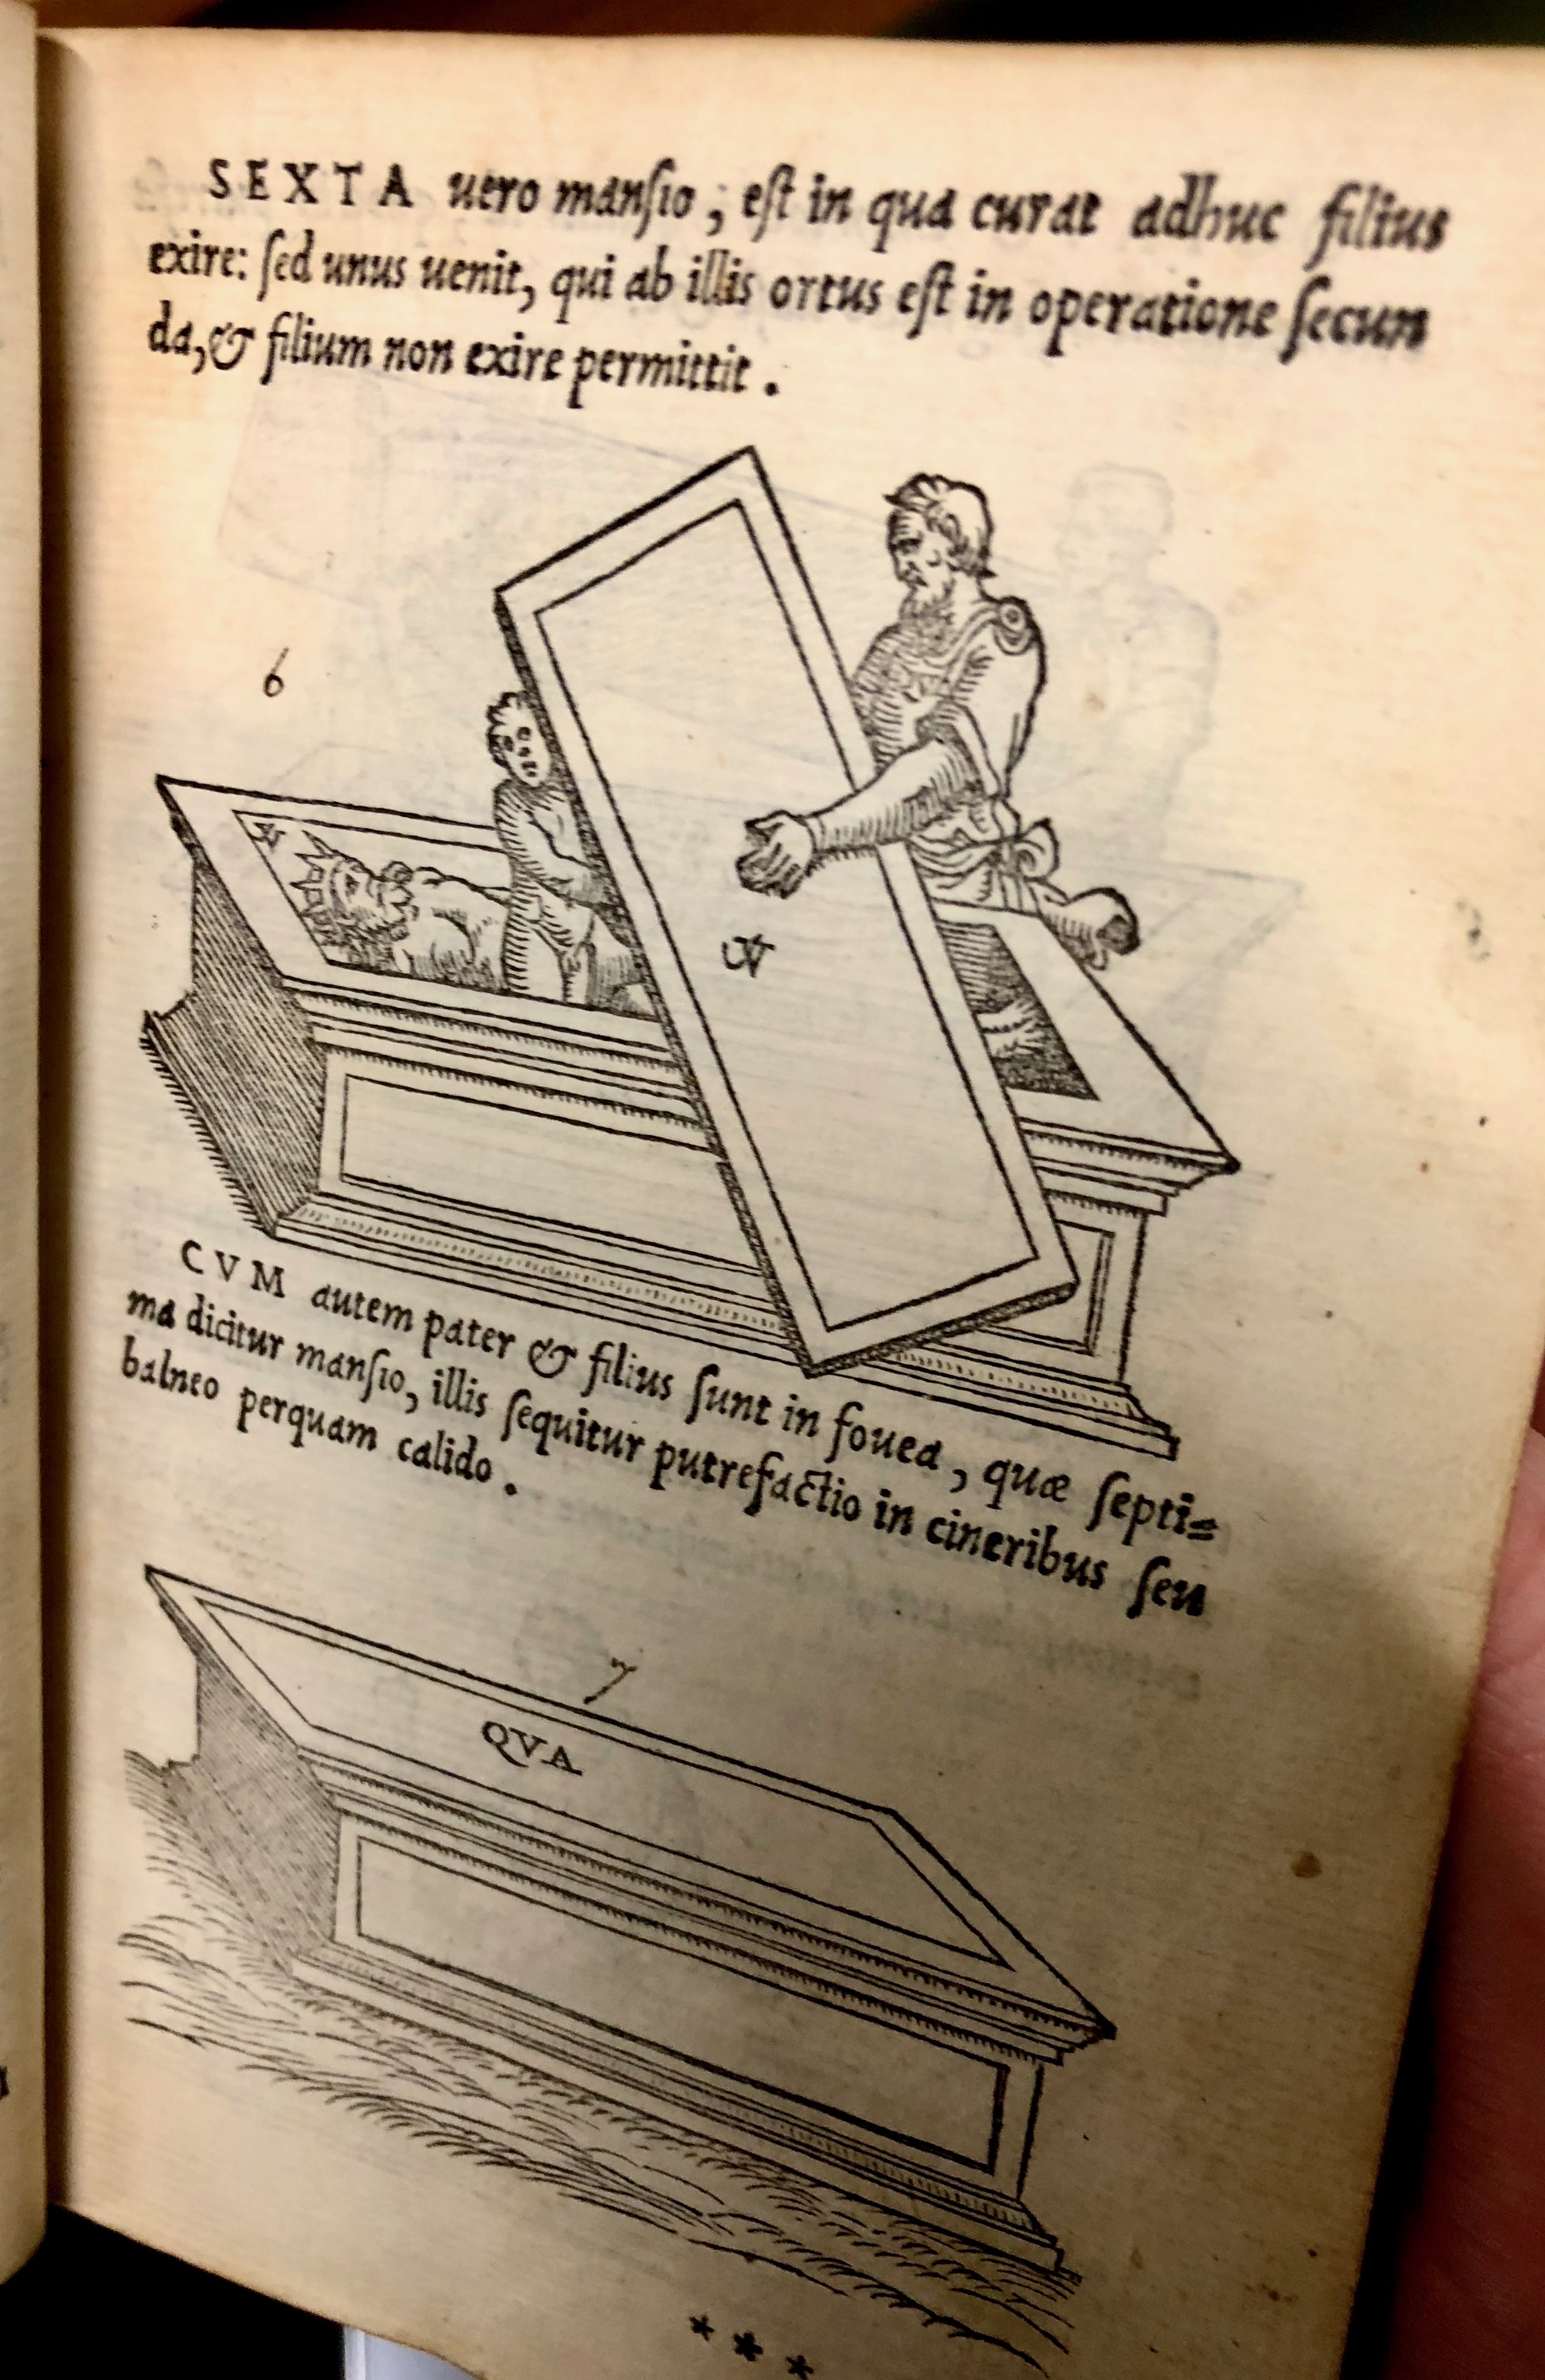 Step six: the son tries to escape but is prevented from doing so. Step seven: the son and King's ashes putrefy. From 'Pretiosa margarita : novella de thesauro, ac pretiosissimo philosophorum lapide' by Giano Lacinio, 1546, Venice. (Maddison Collection 2B7, F10528400)